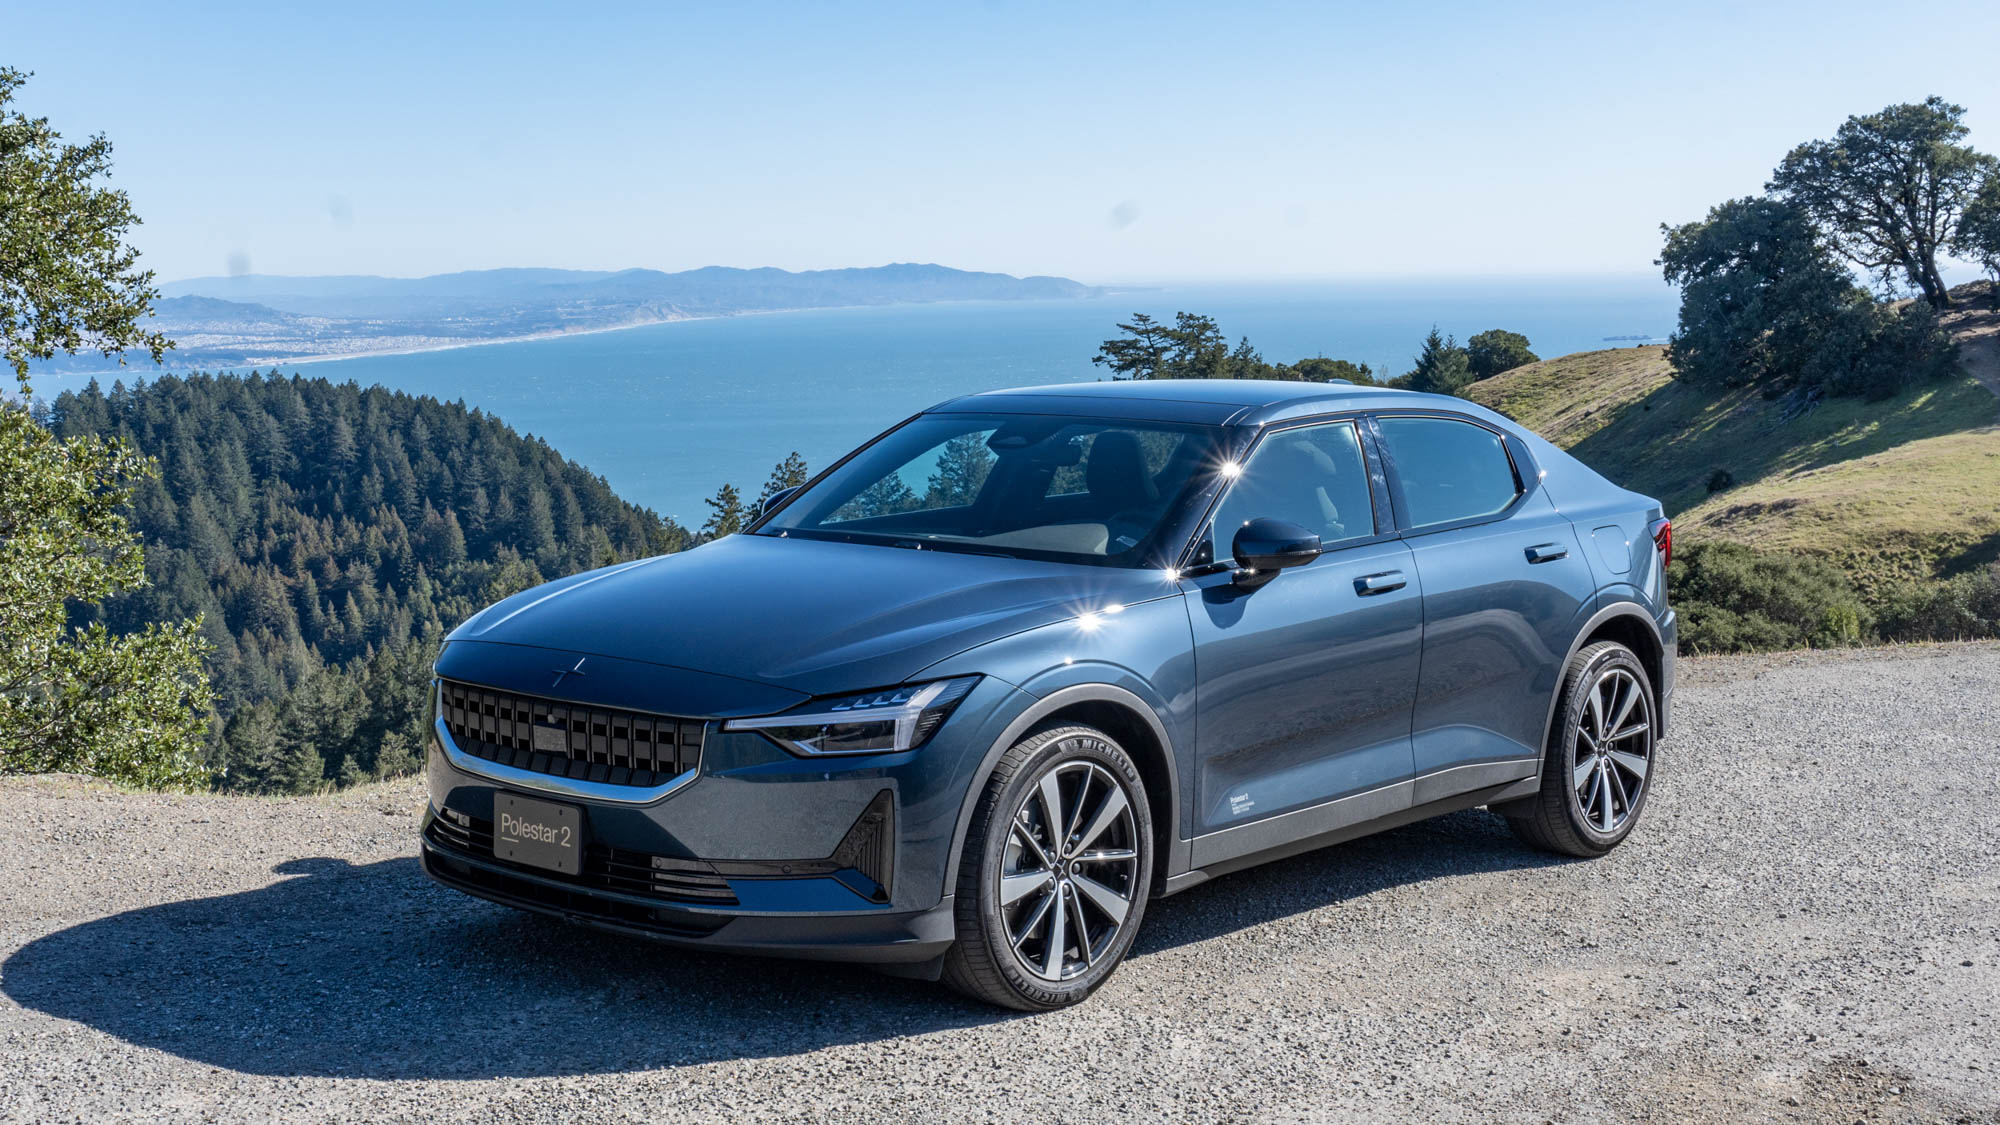 2022 Polestar 2 review: The perfect combination of range and exuberance |  Tom's Guide